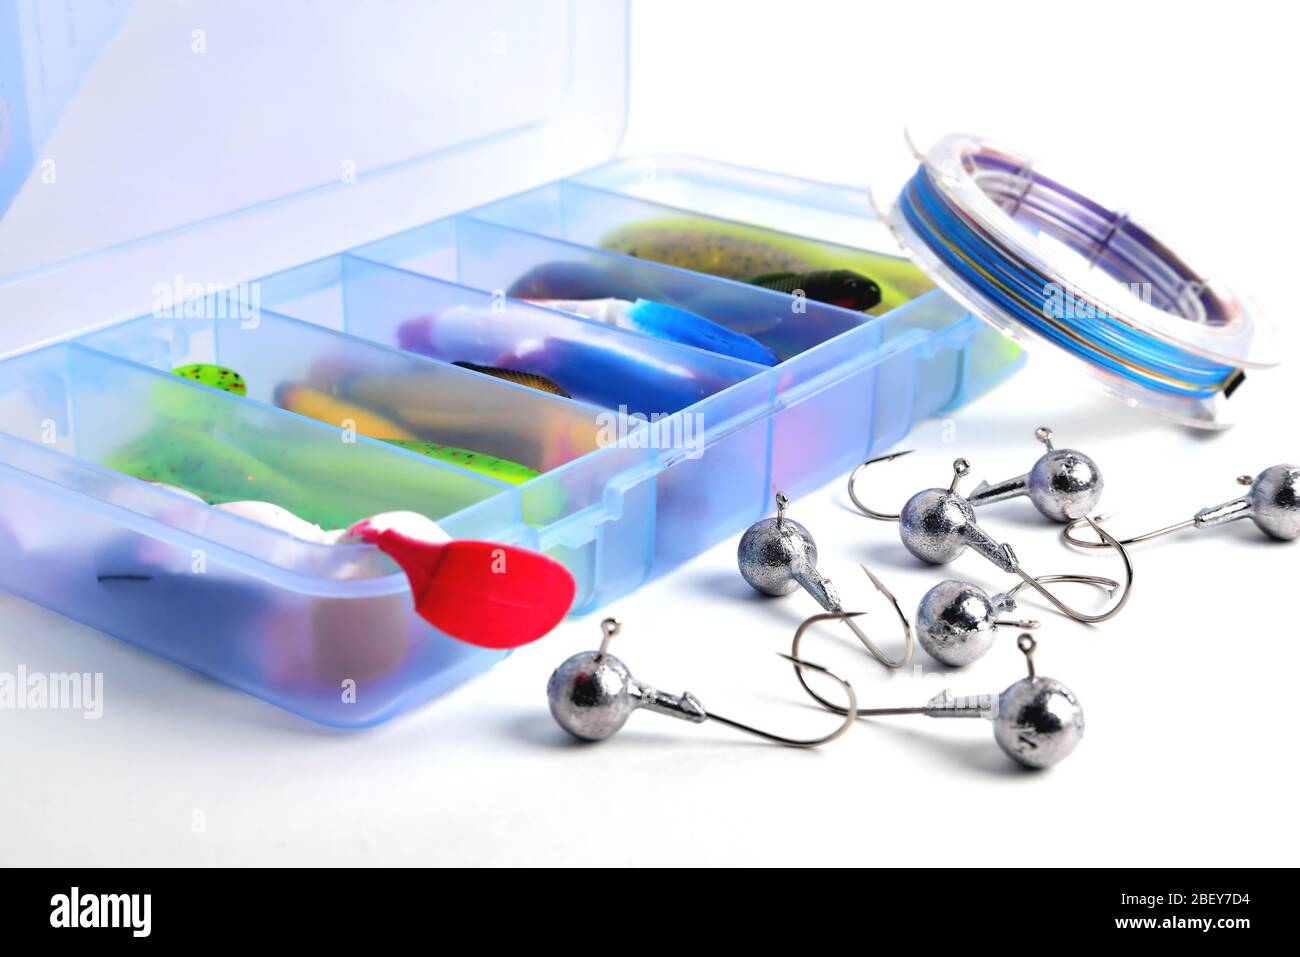 Box for fishing accessories with silicone baits inside, Jig hooks, braided reel on a white background close-up Stock Photo